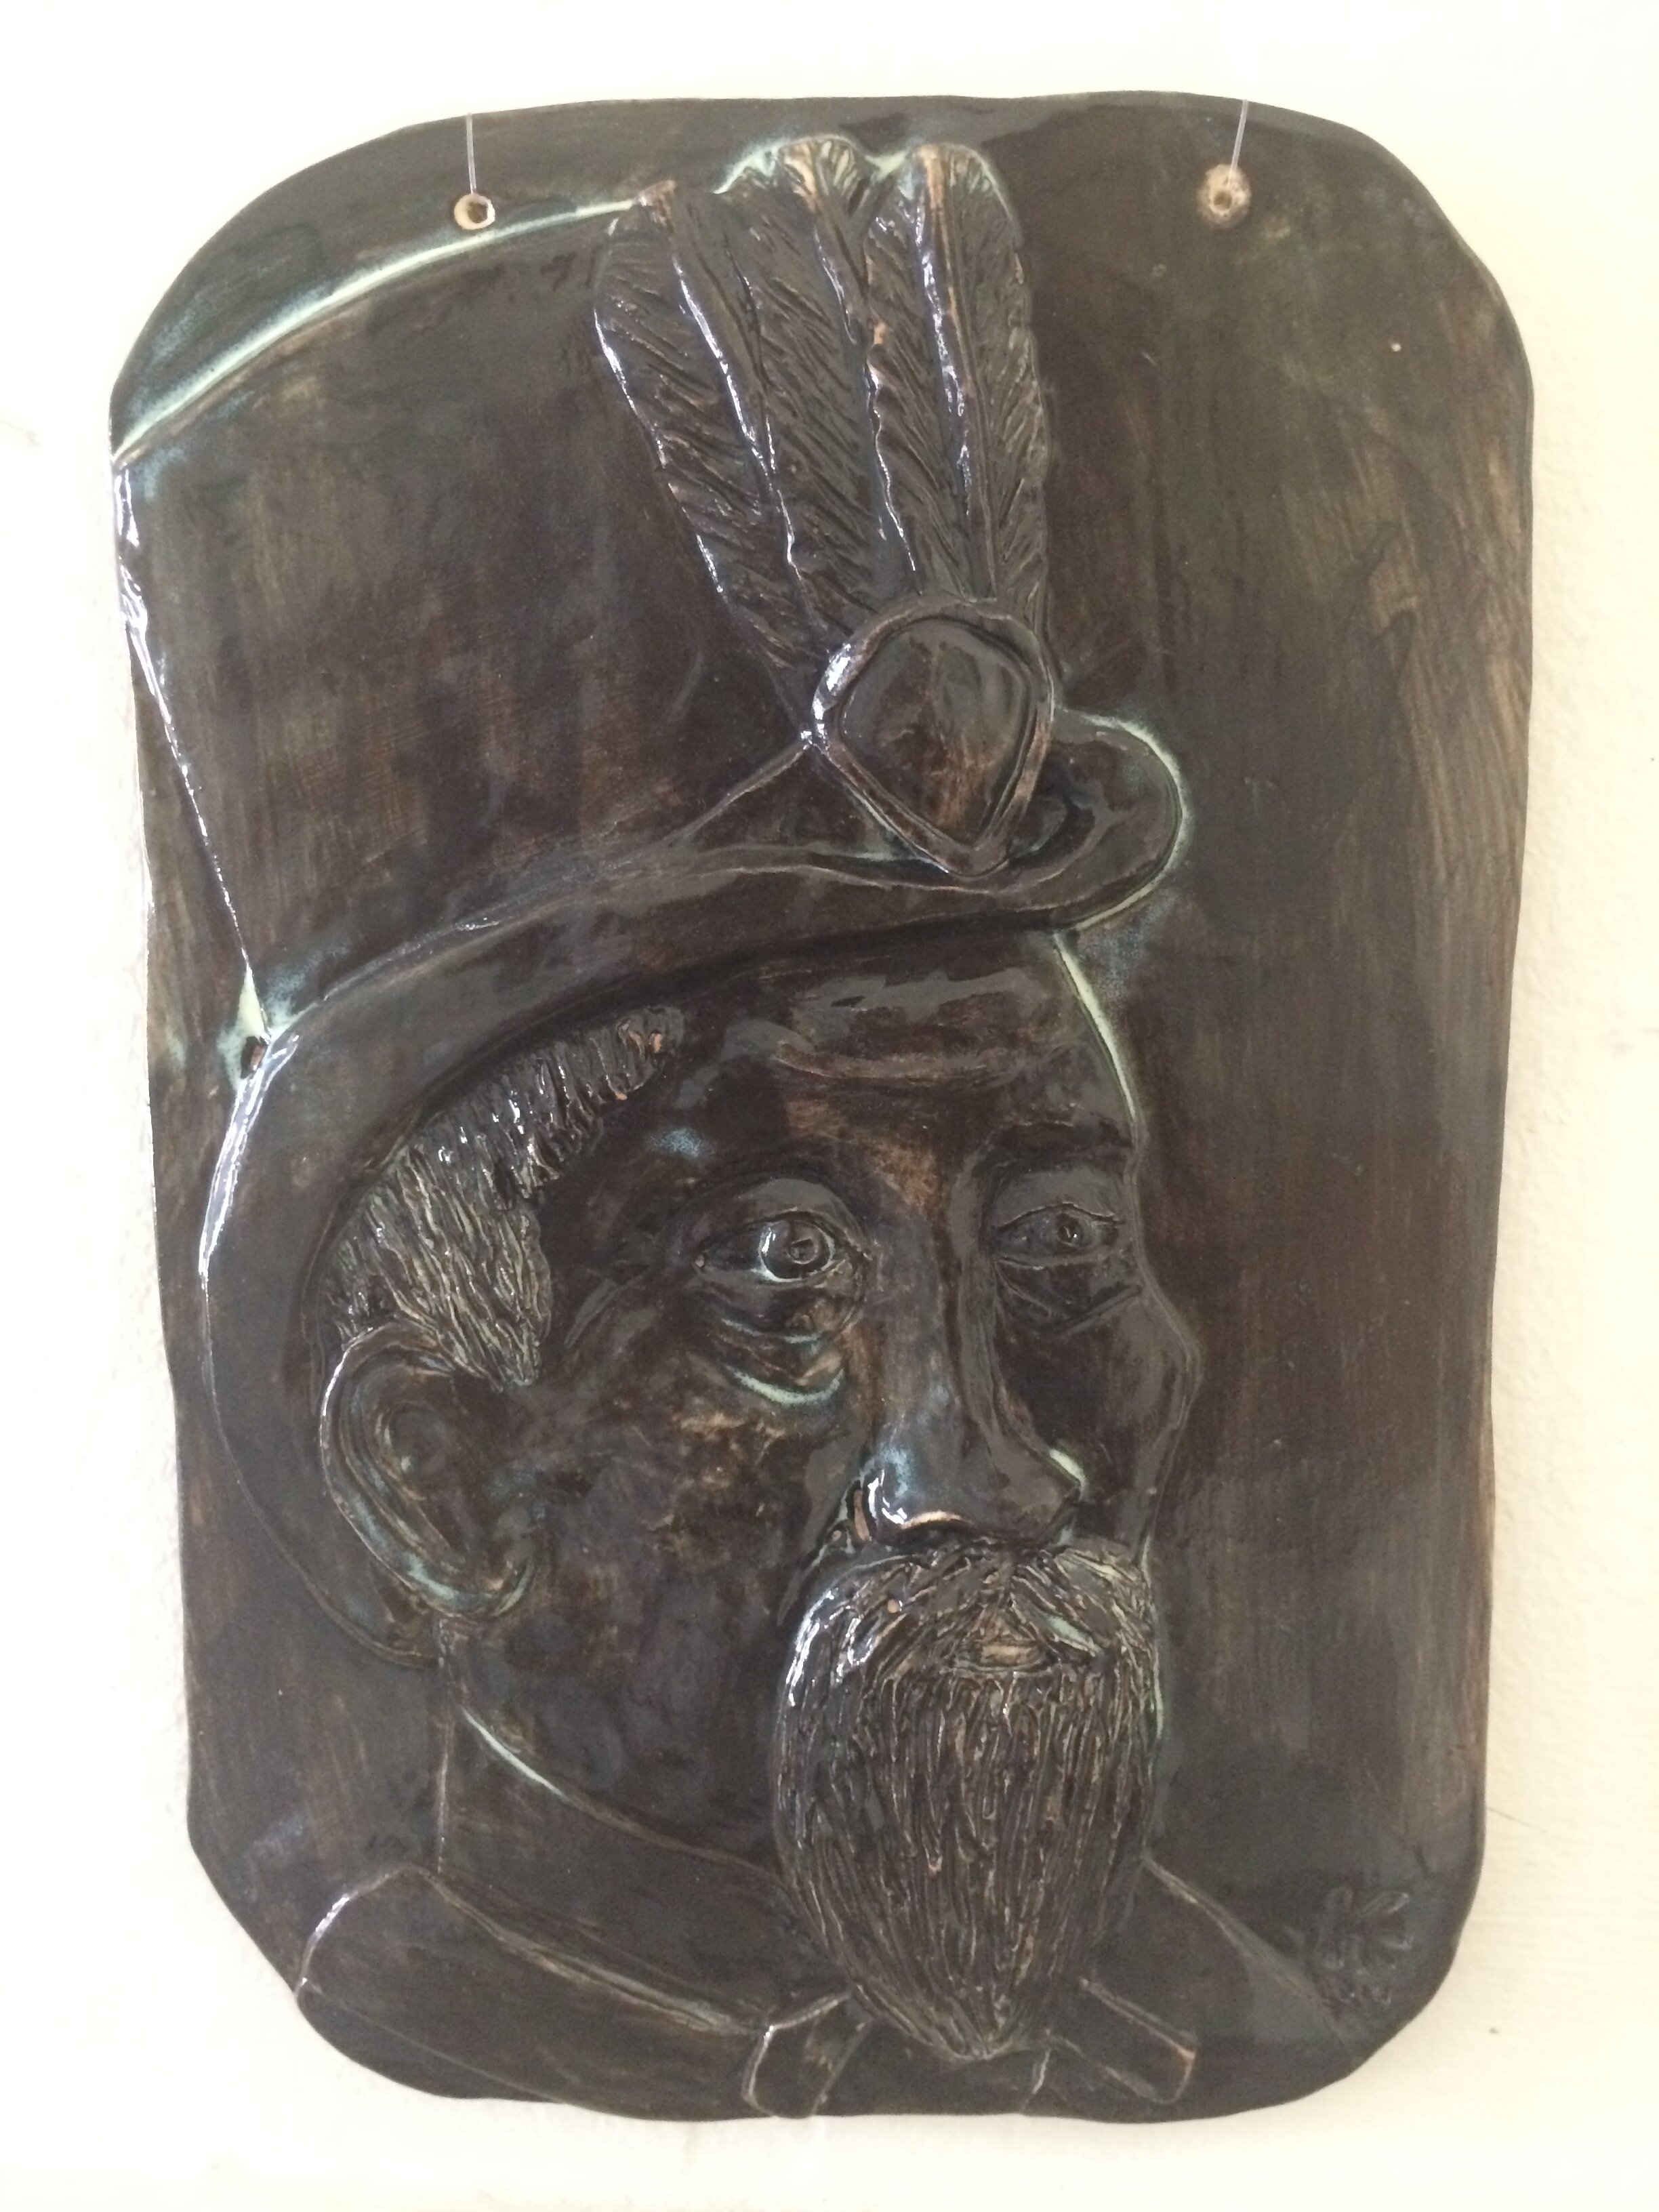   Emperor Norton, 2014, by Kaytea Petro (b. 1978).  Bas-relief. Image courtesy of the artist.  Artist’s website . [Added 7.4.2021] 